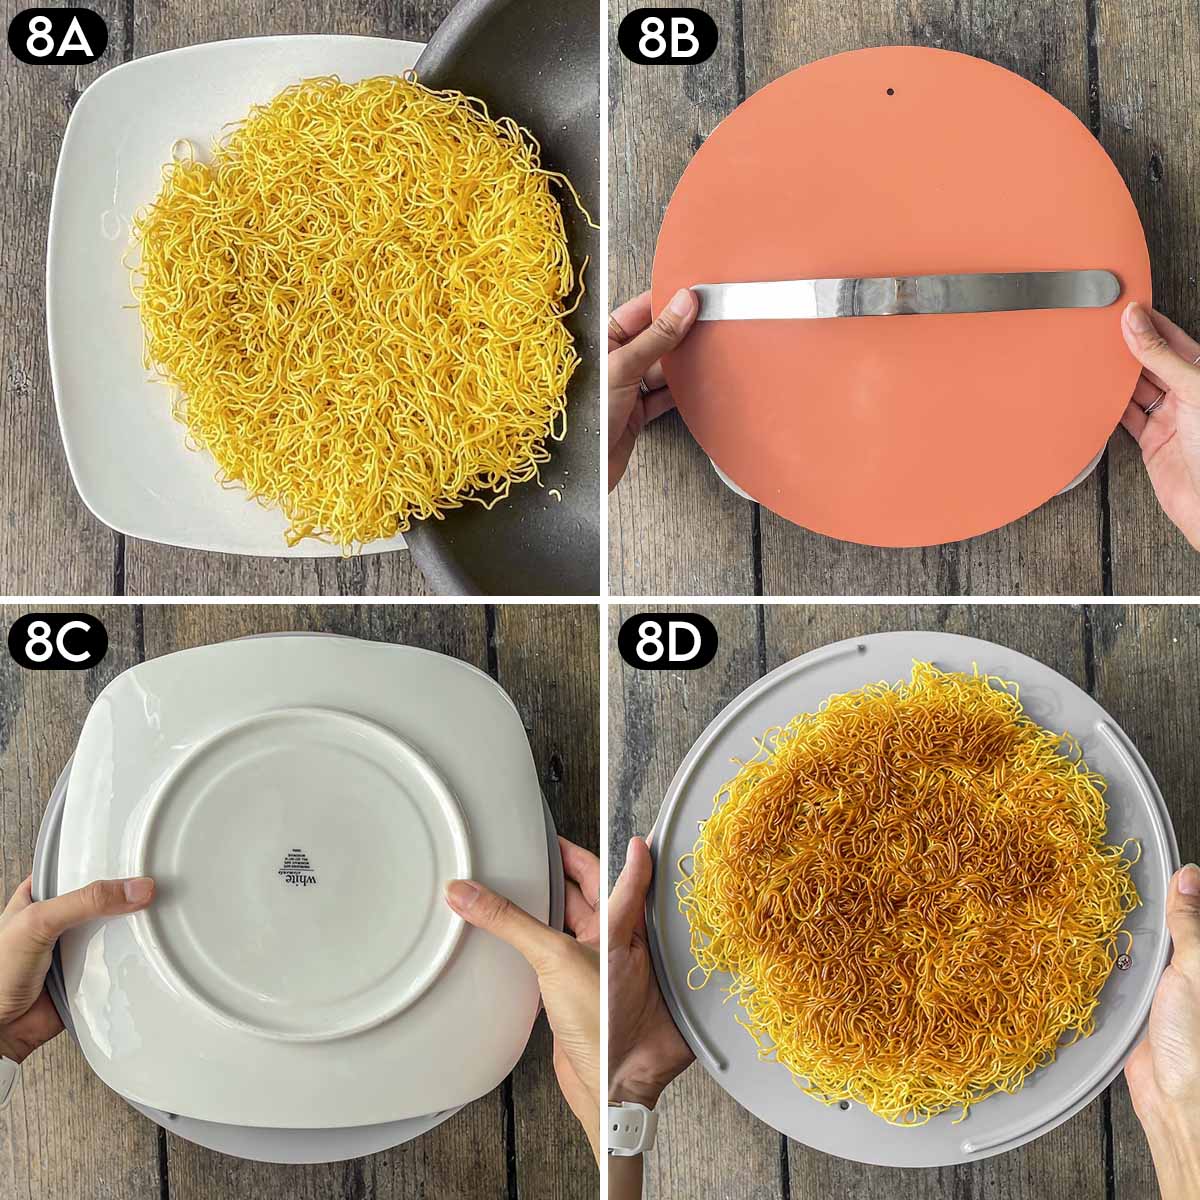 How to flip noodles using a plate and lid.